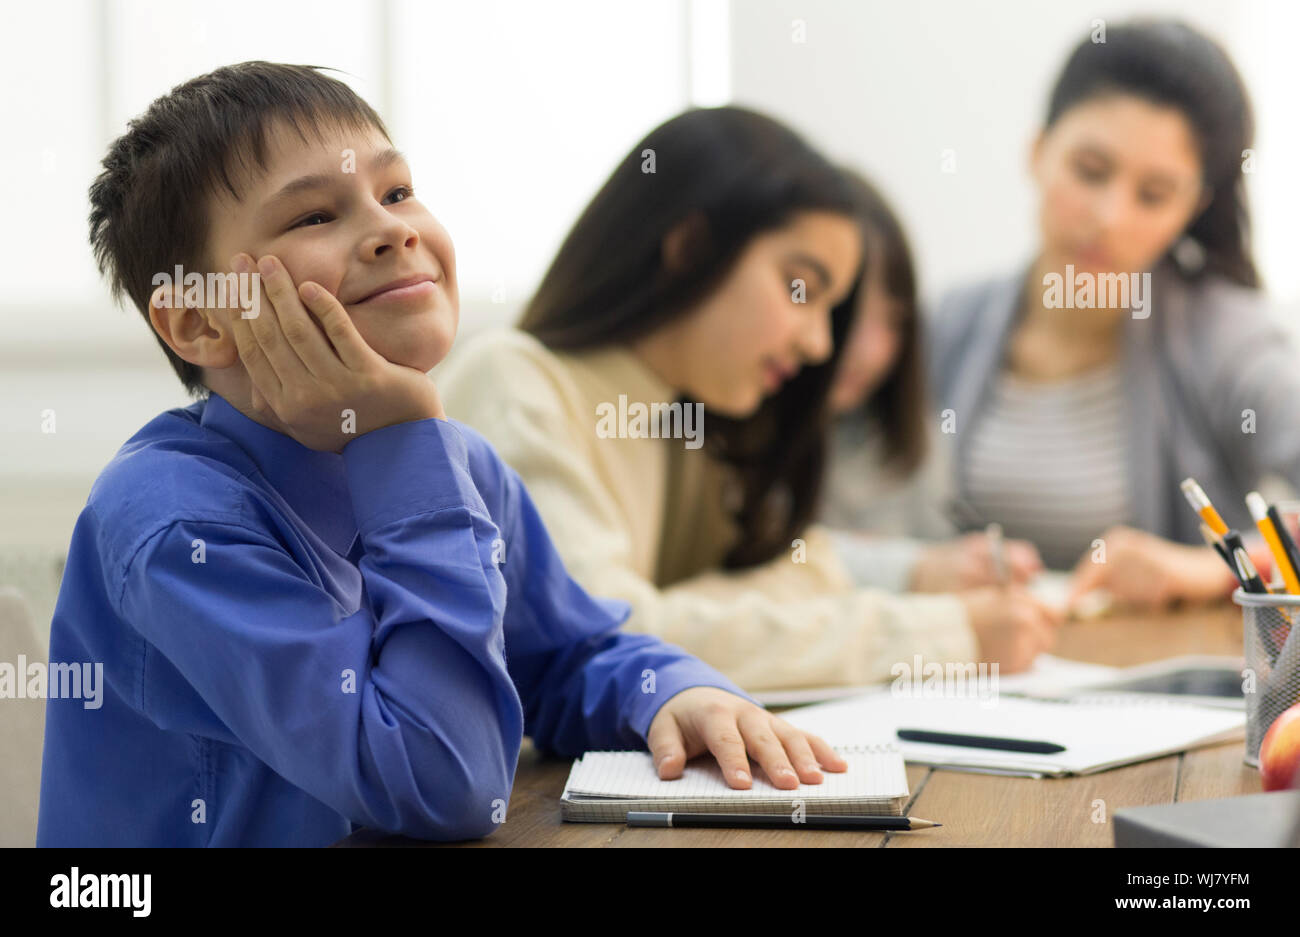 Dreamful pupil not paying attention in classroom Stock Photo